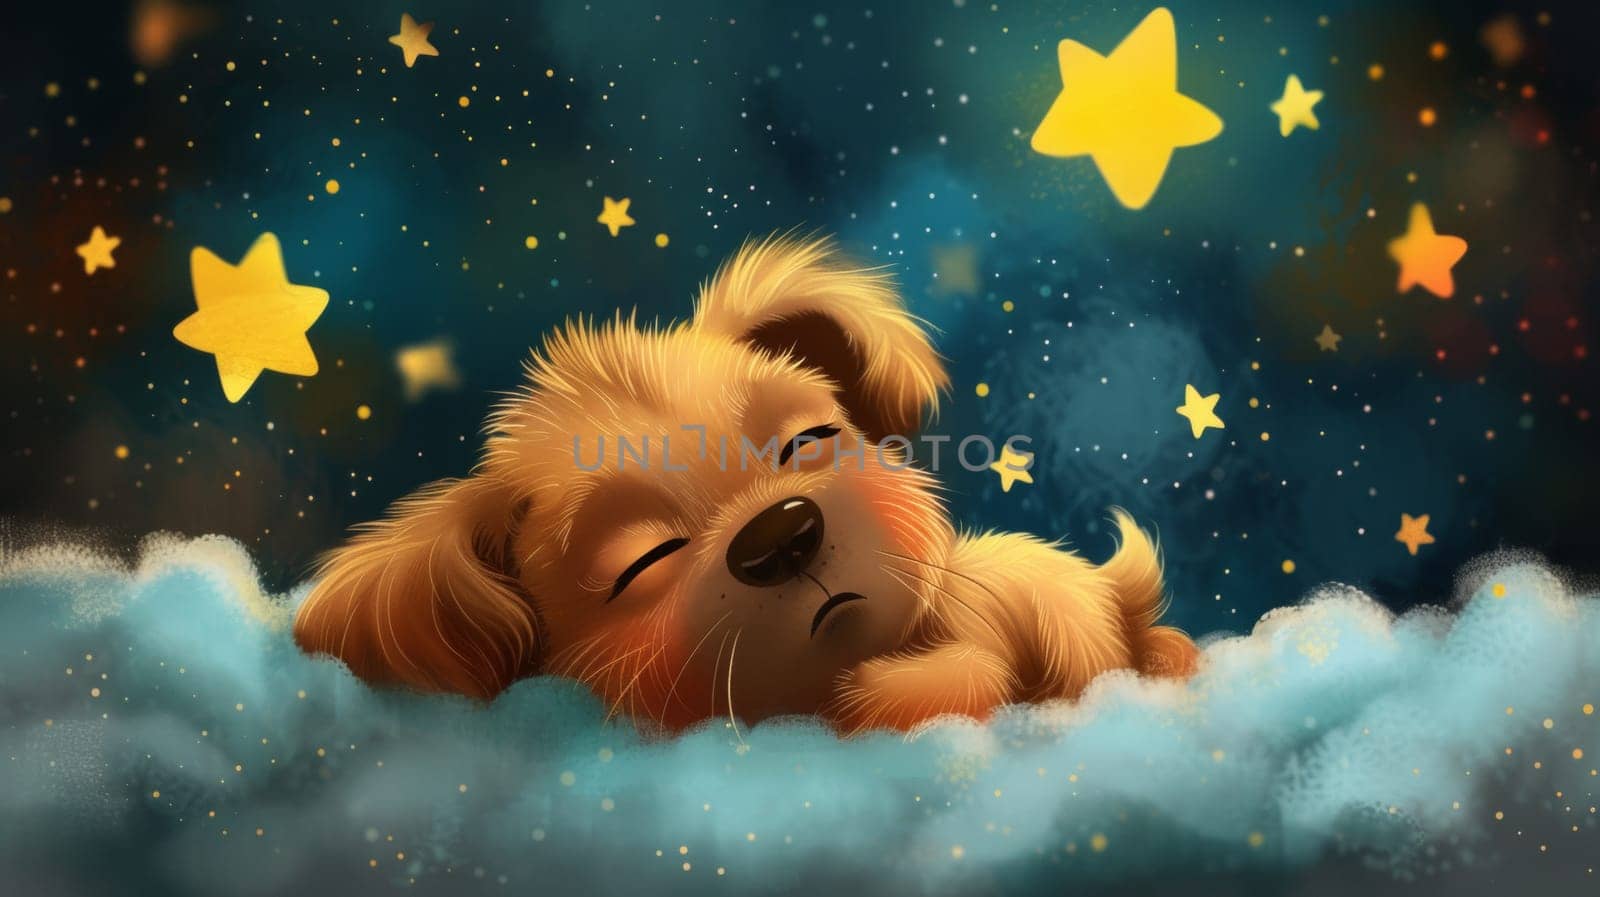 A cute little dog sleeping on a cloud with stars in the sky, AI by starush